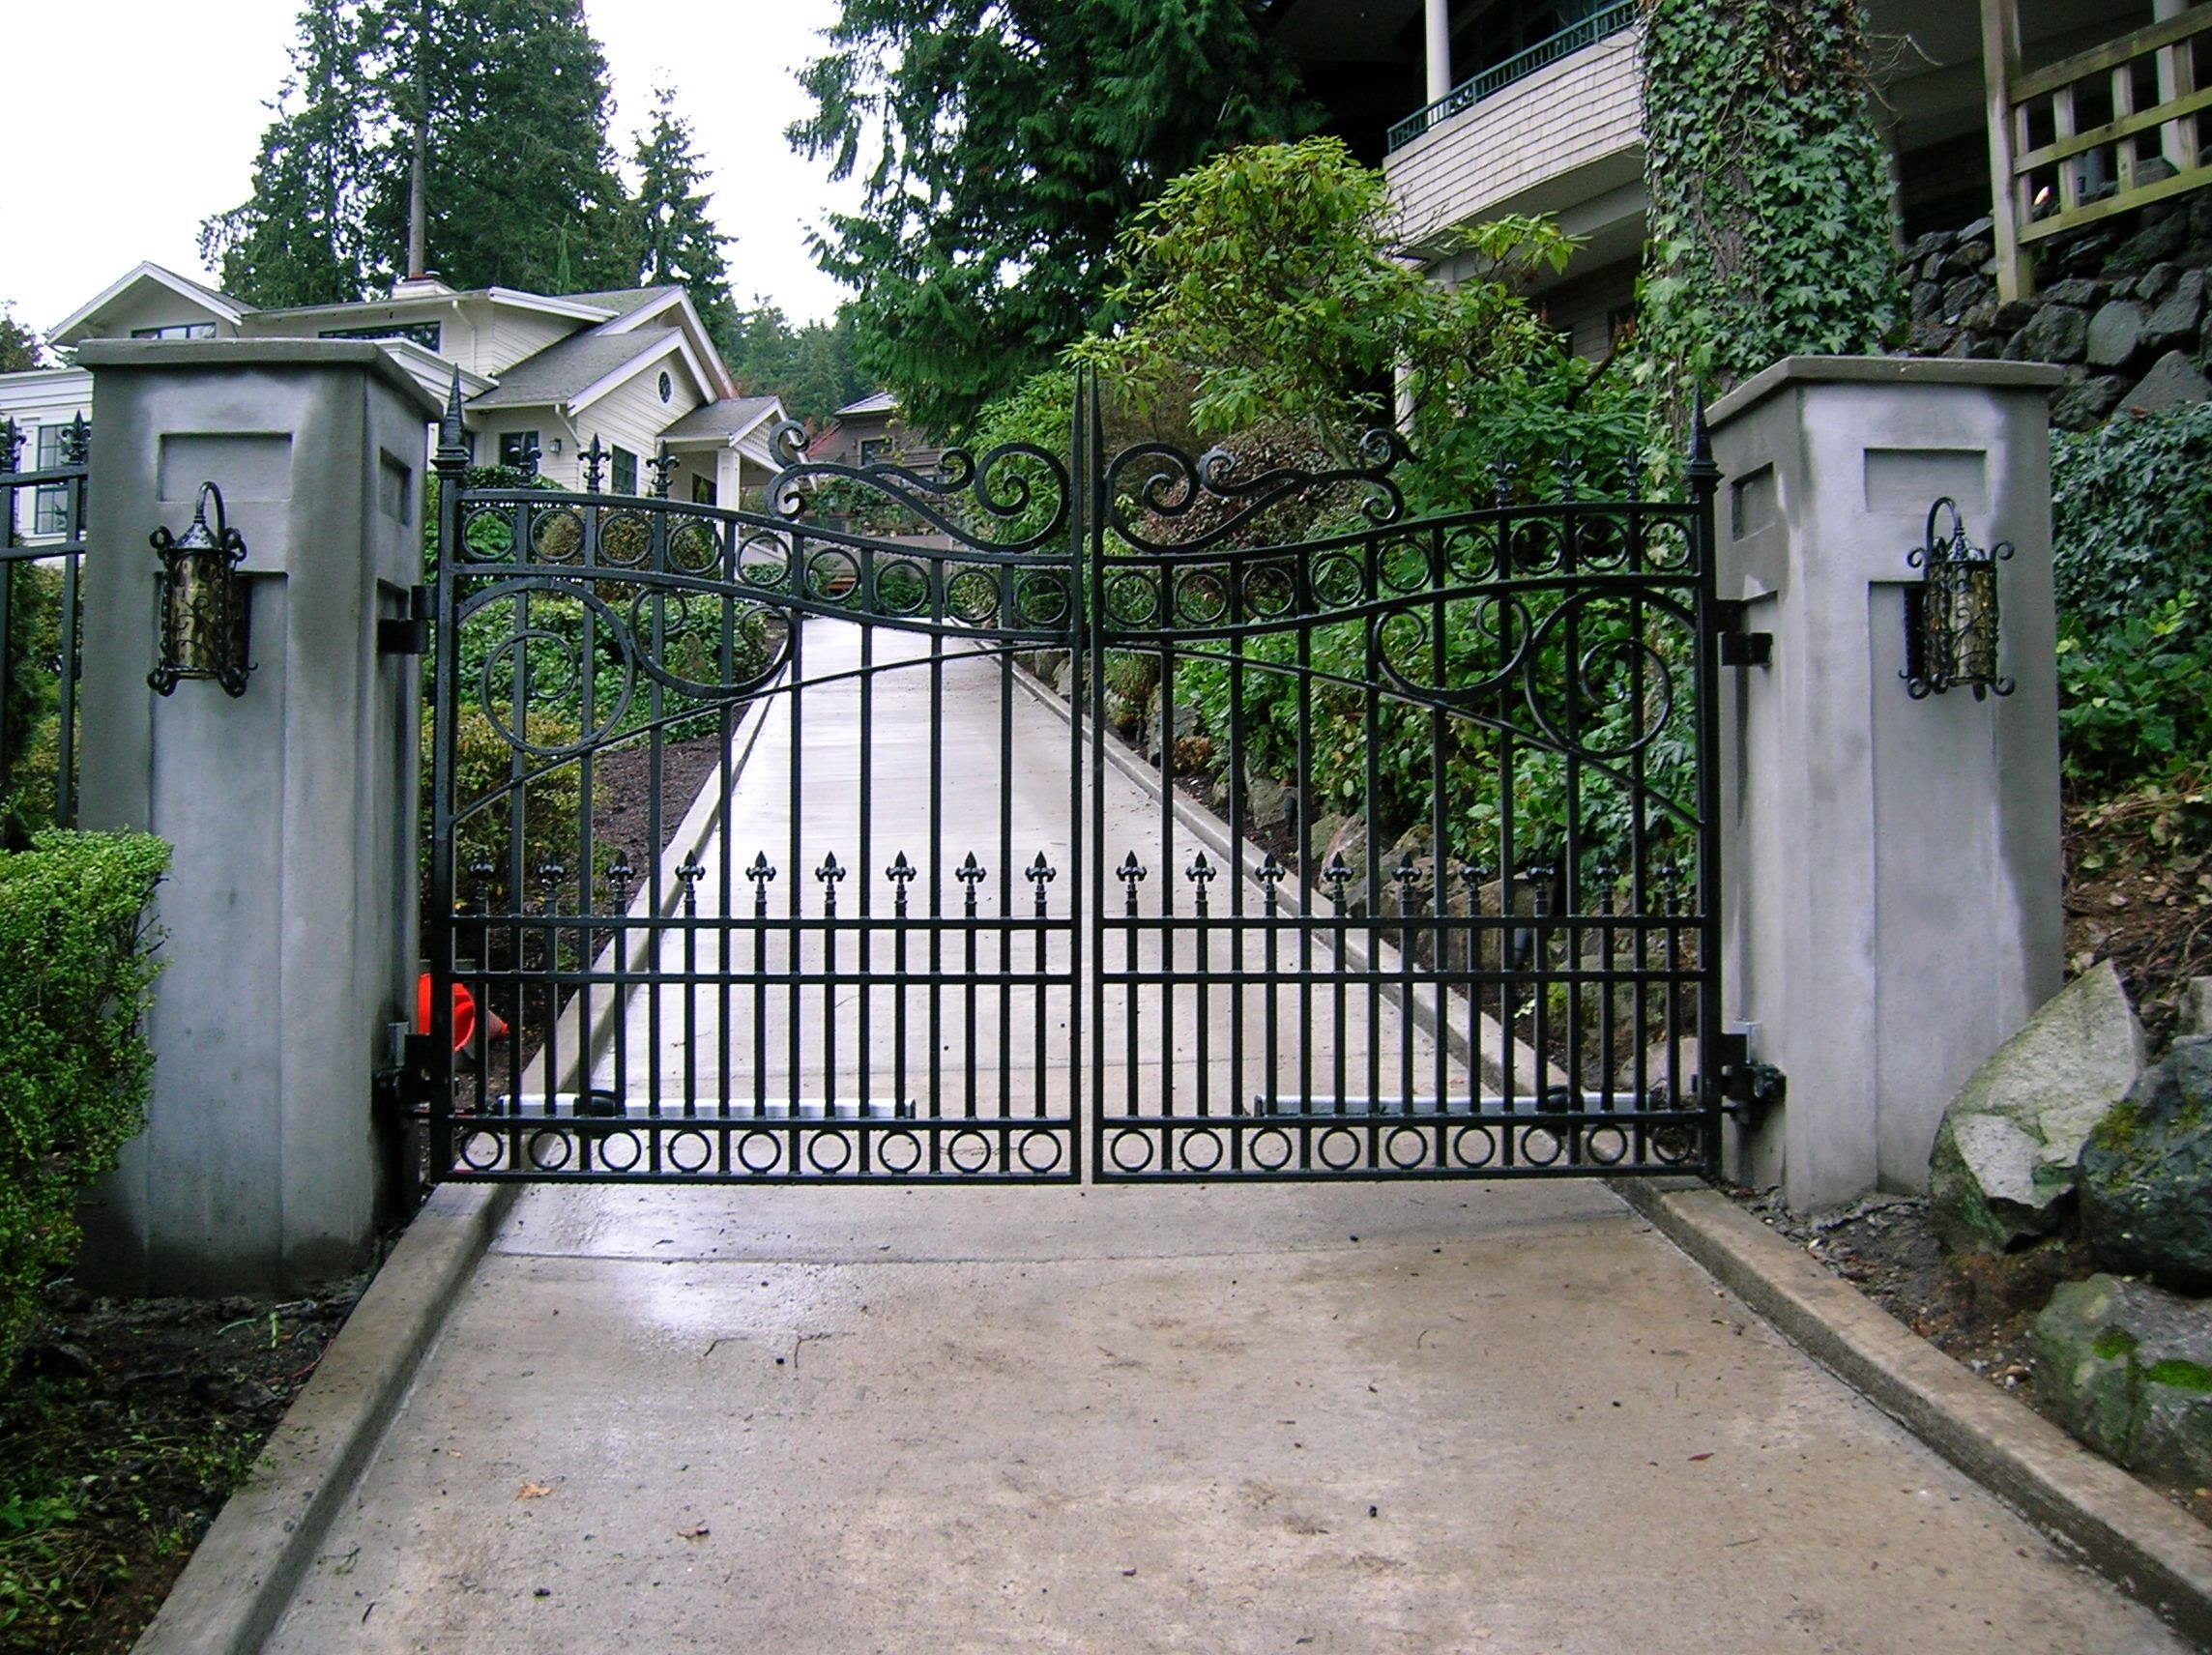 Gate Ideas for the House